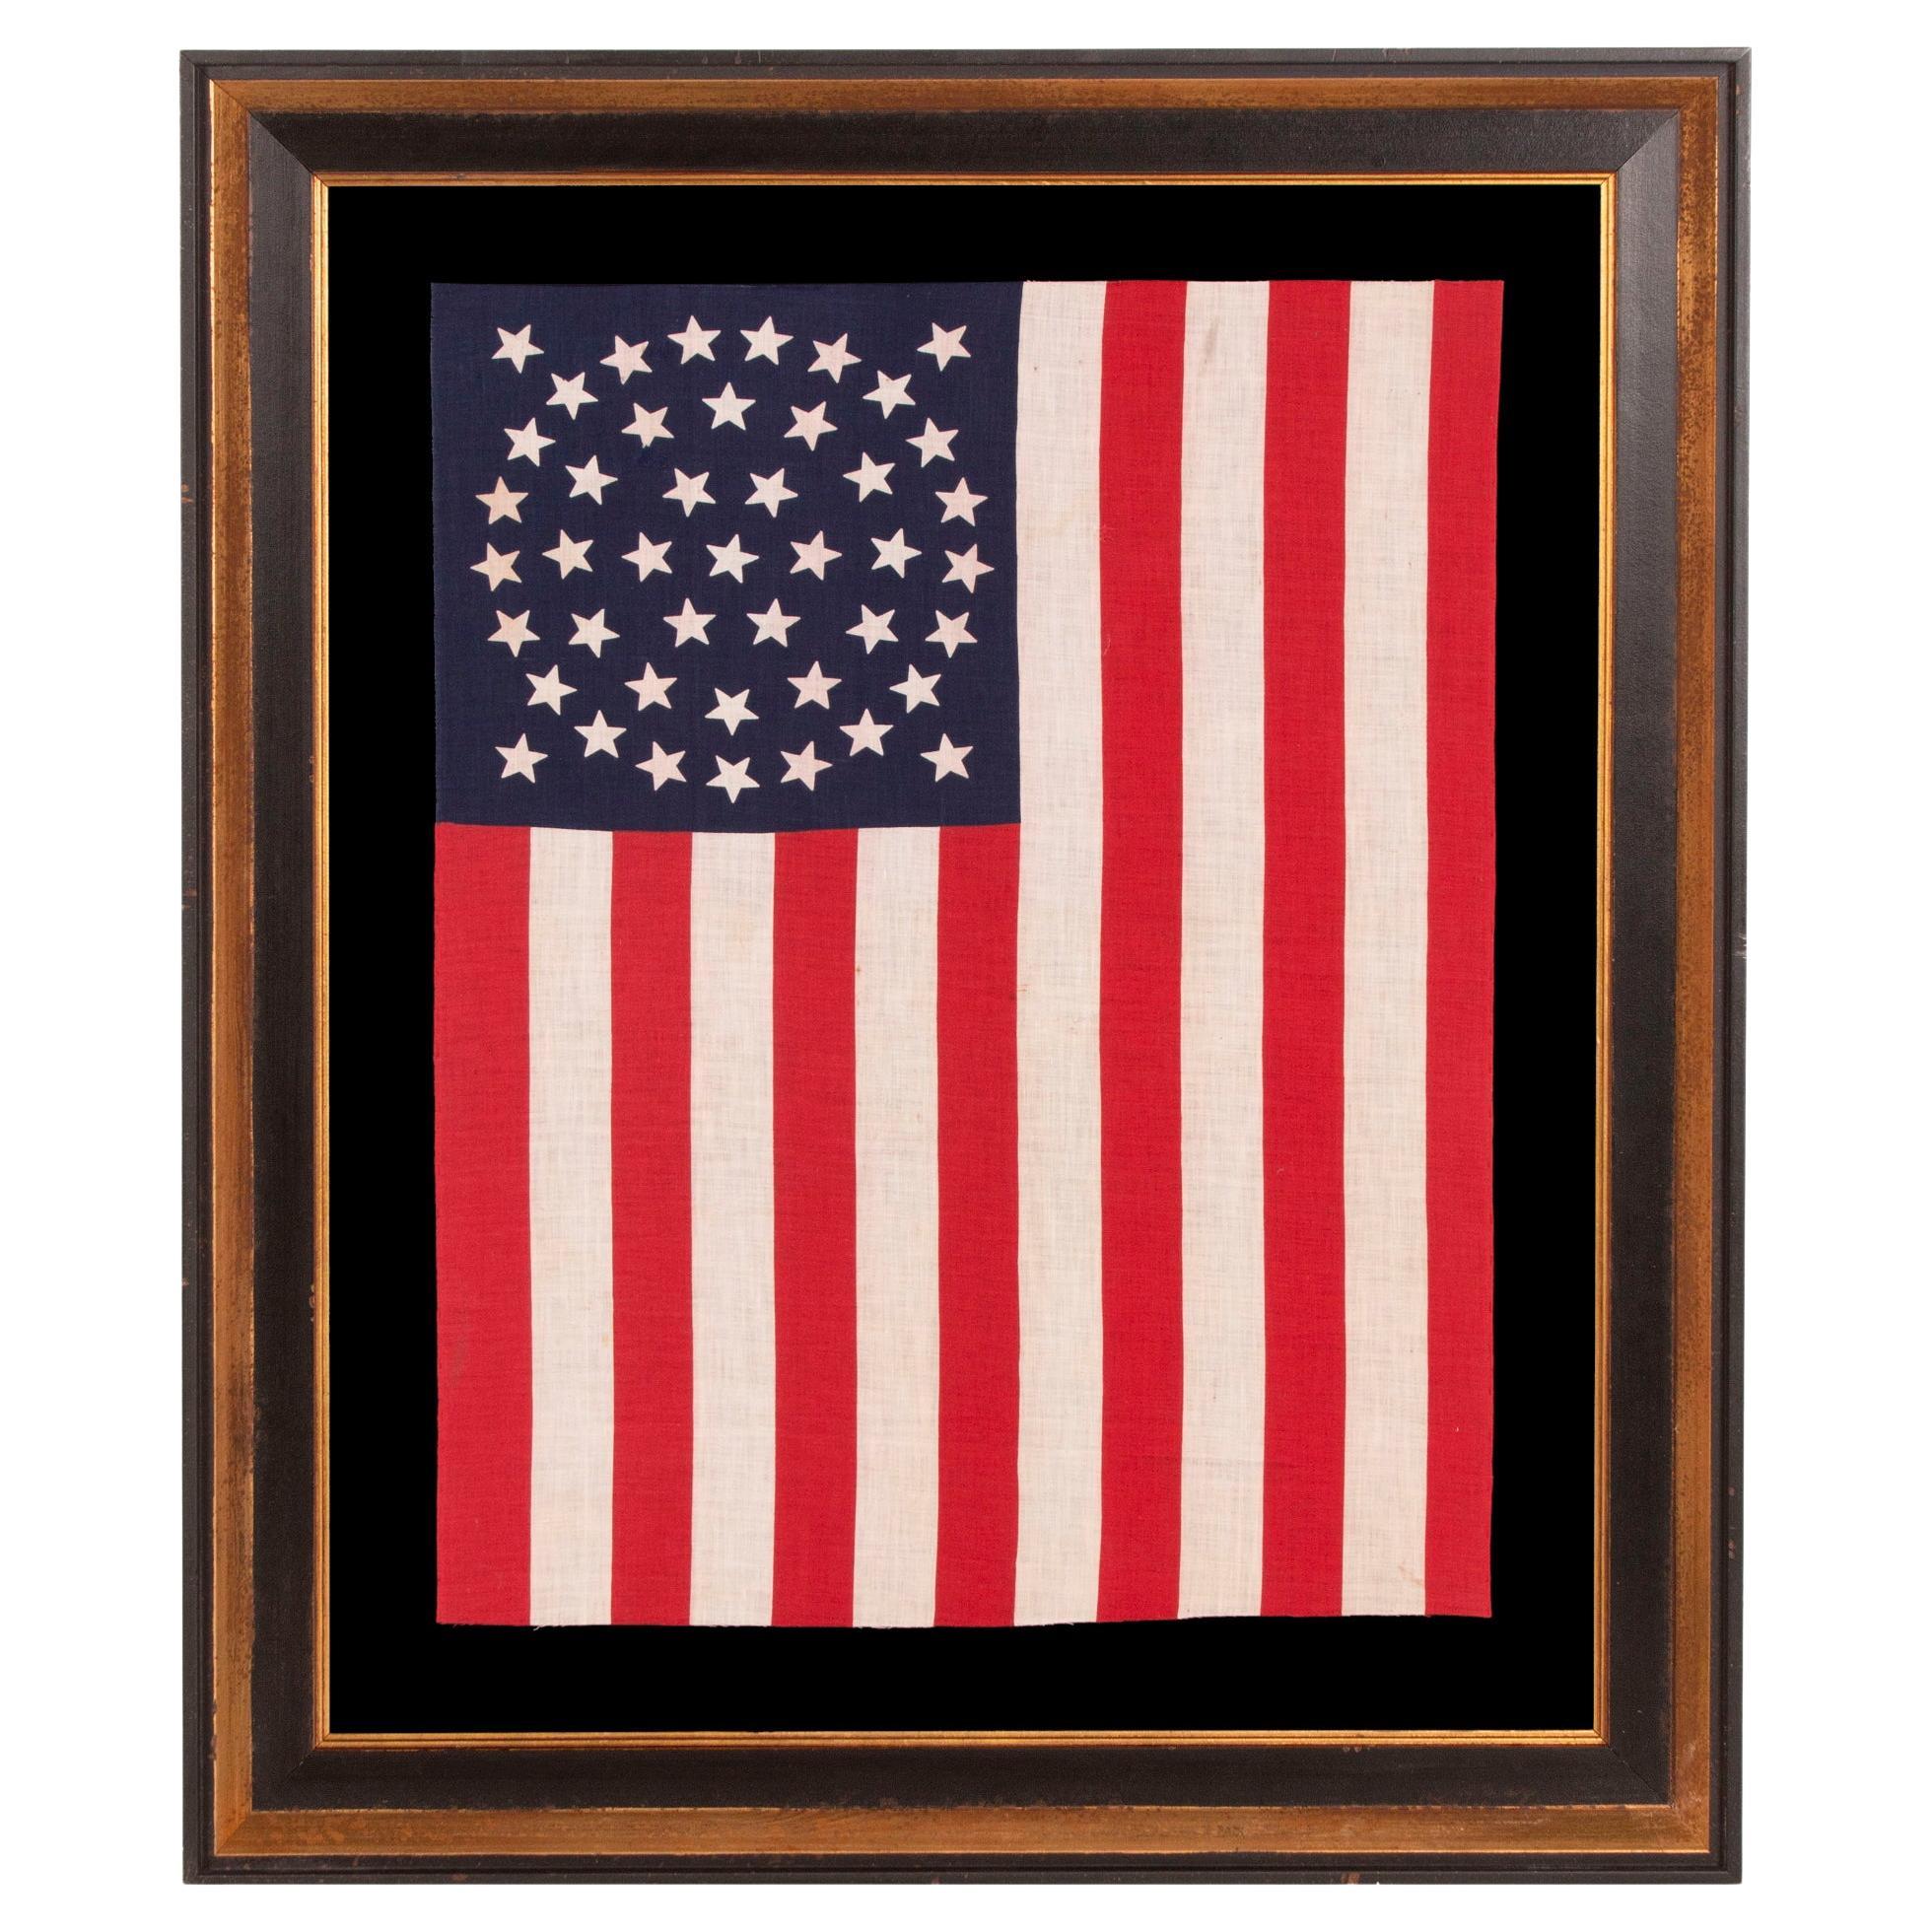 44 Star Antique American Flag, Stars in a Triple Wreath Pattern, Wyoming State